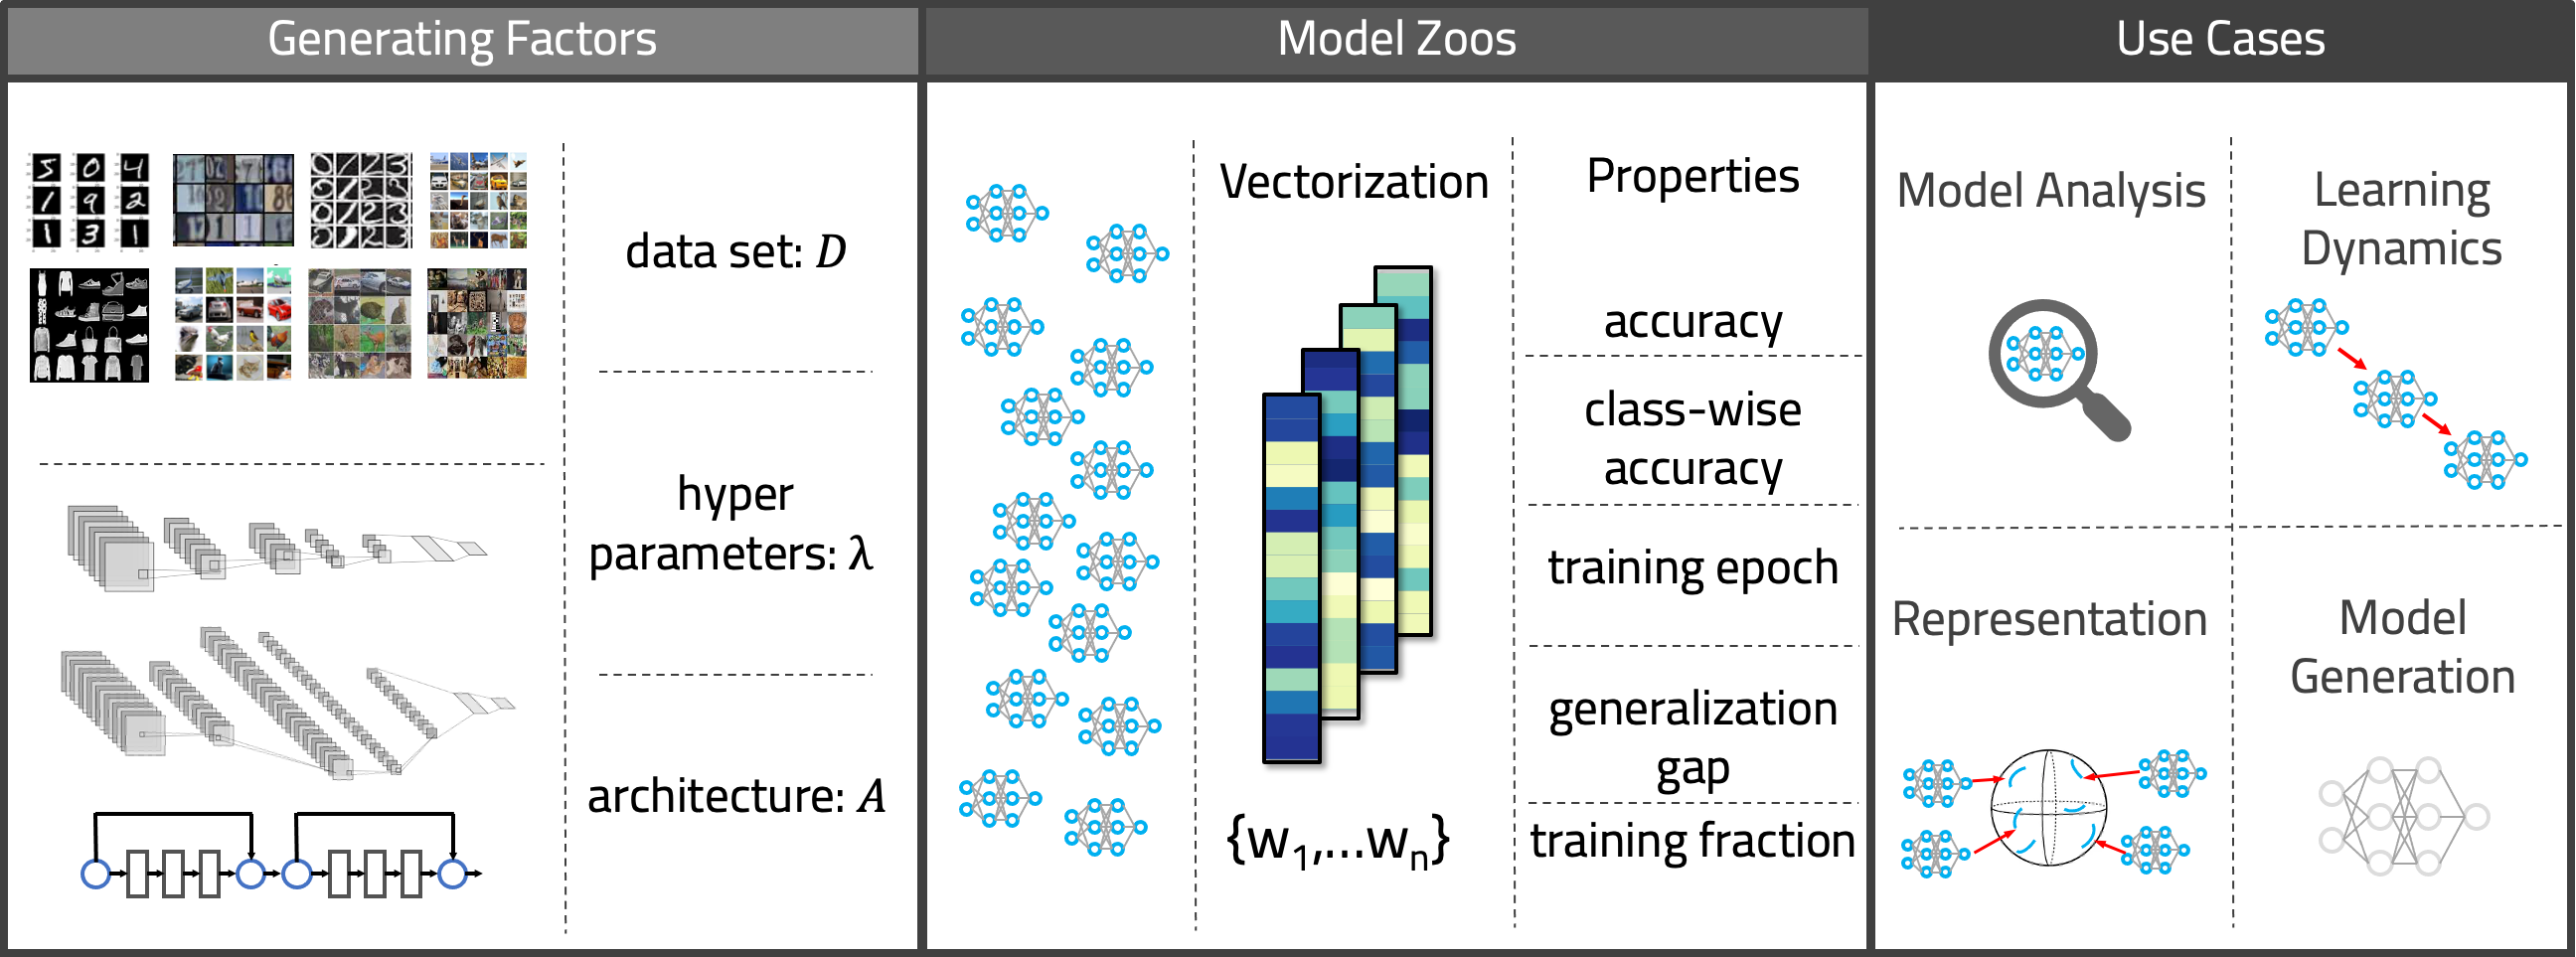 Schematic overview of the Model Zoo Generation.